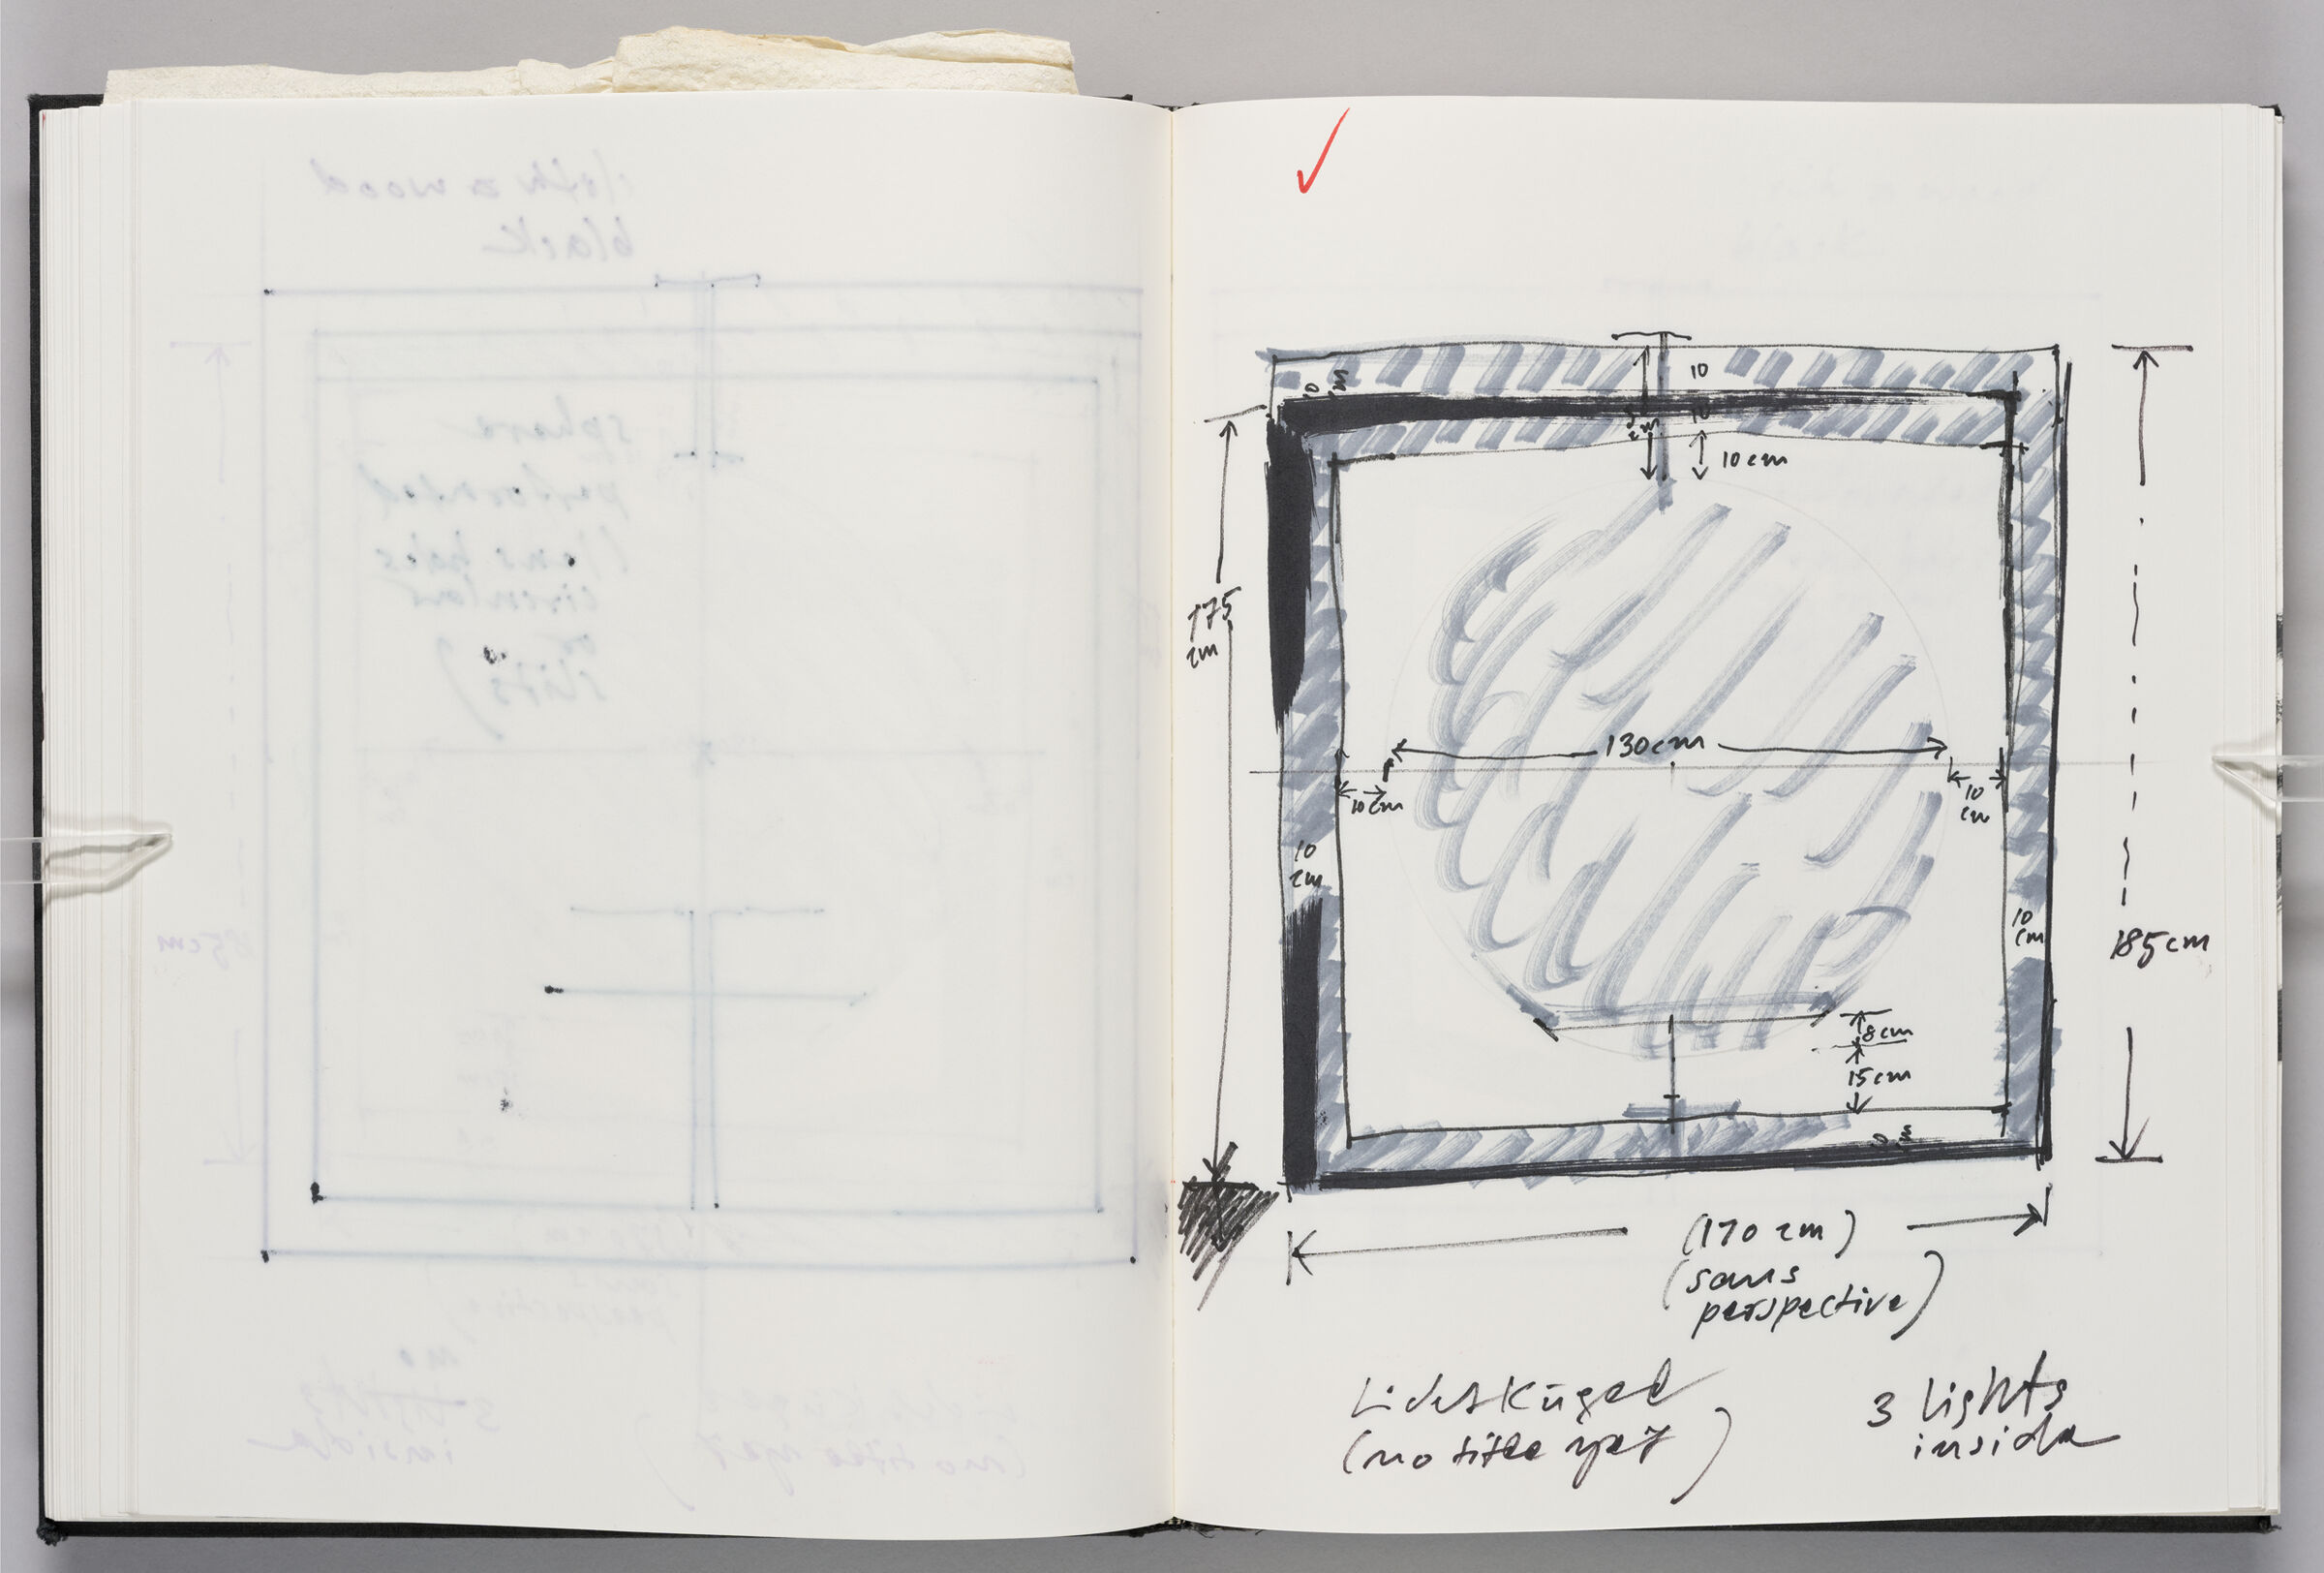 Untitled (Bleed-Through Of Previous Page And Color Transfer, Left Page); Untitled (Notes And Light Sculpture, Right Page)